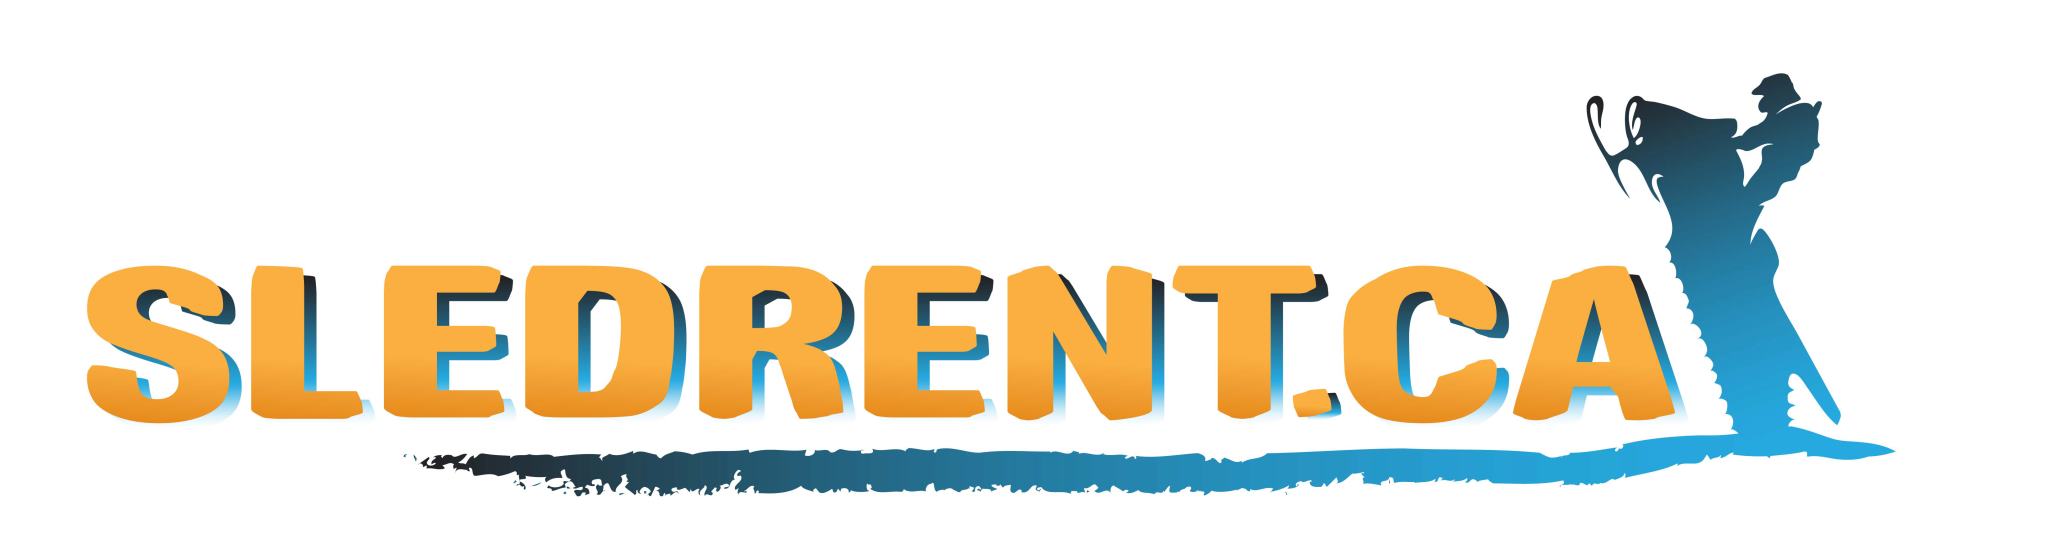 Sledrent.ca - Rent the Perfect Day